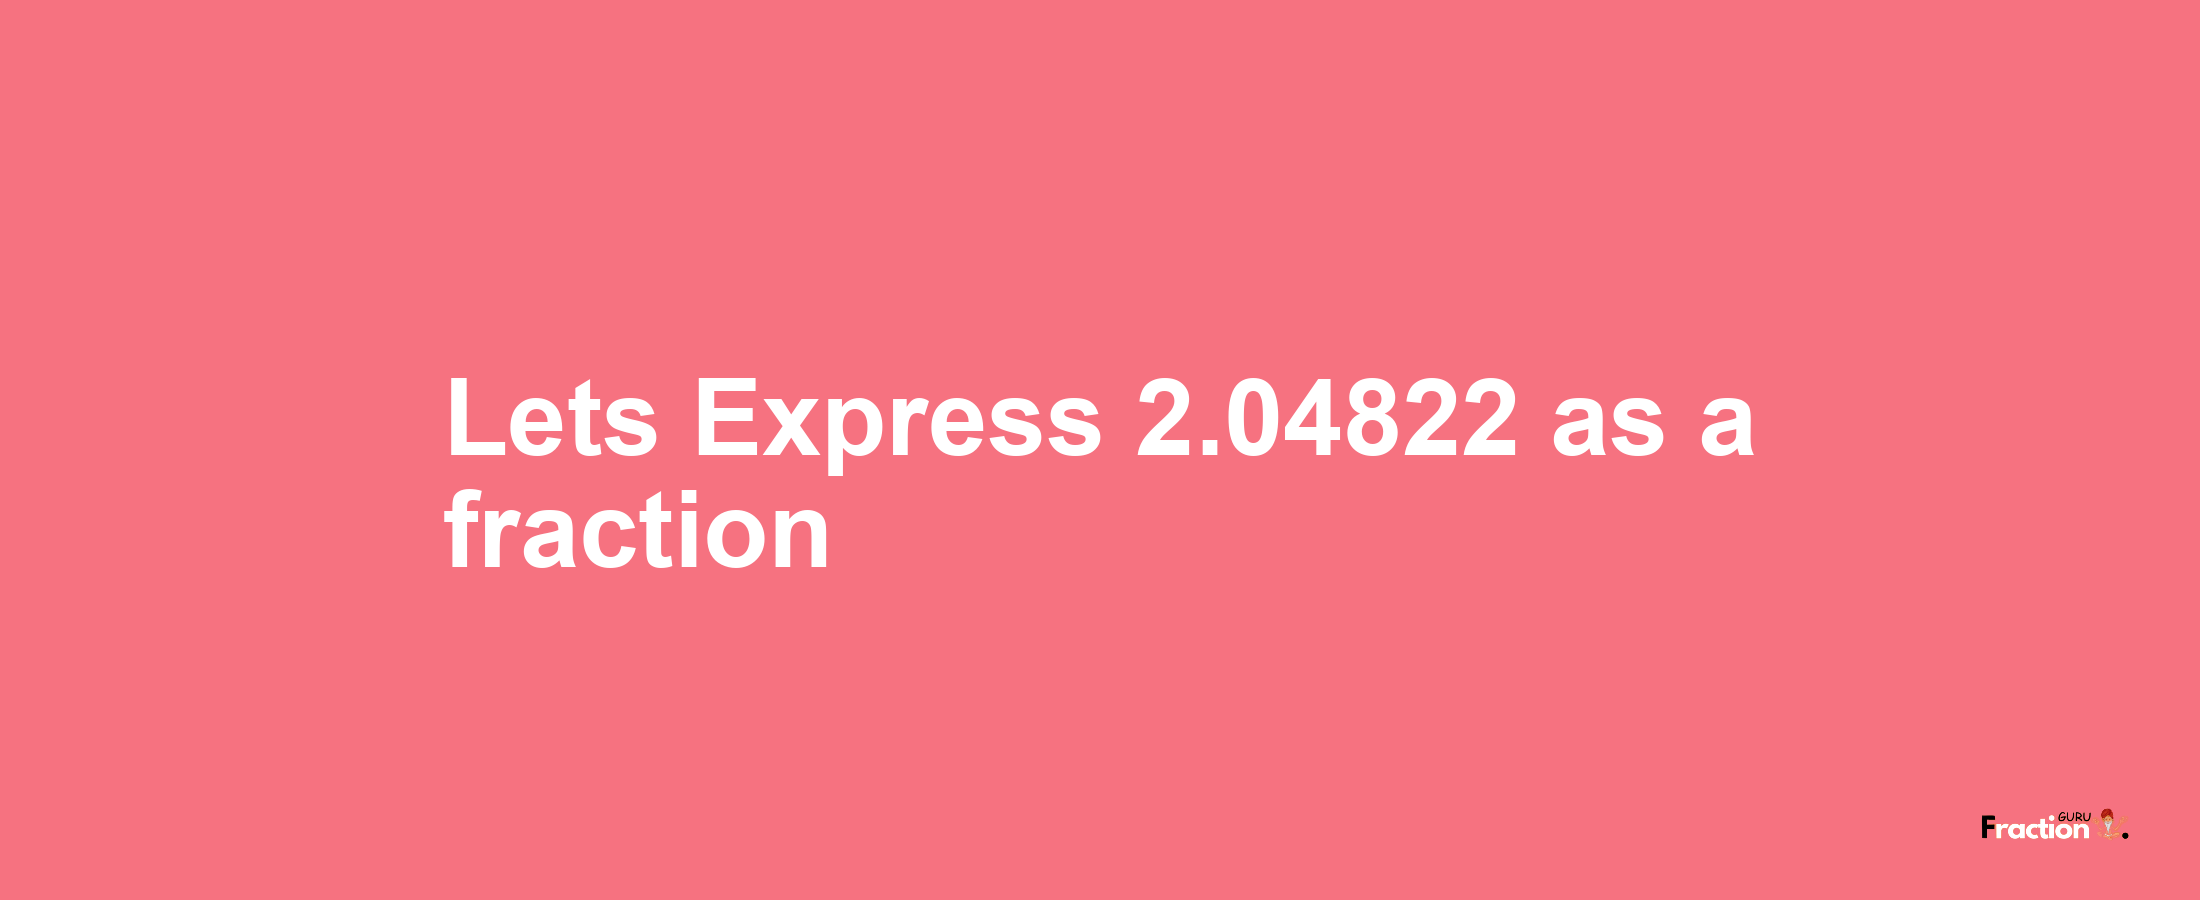 Lets Express 2.04822 as afraction